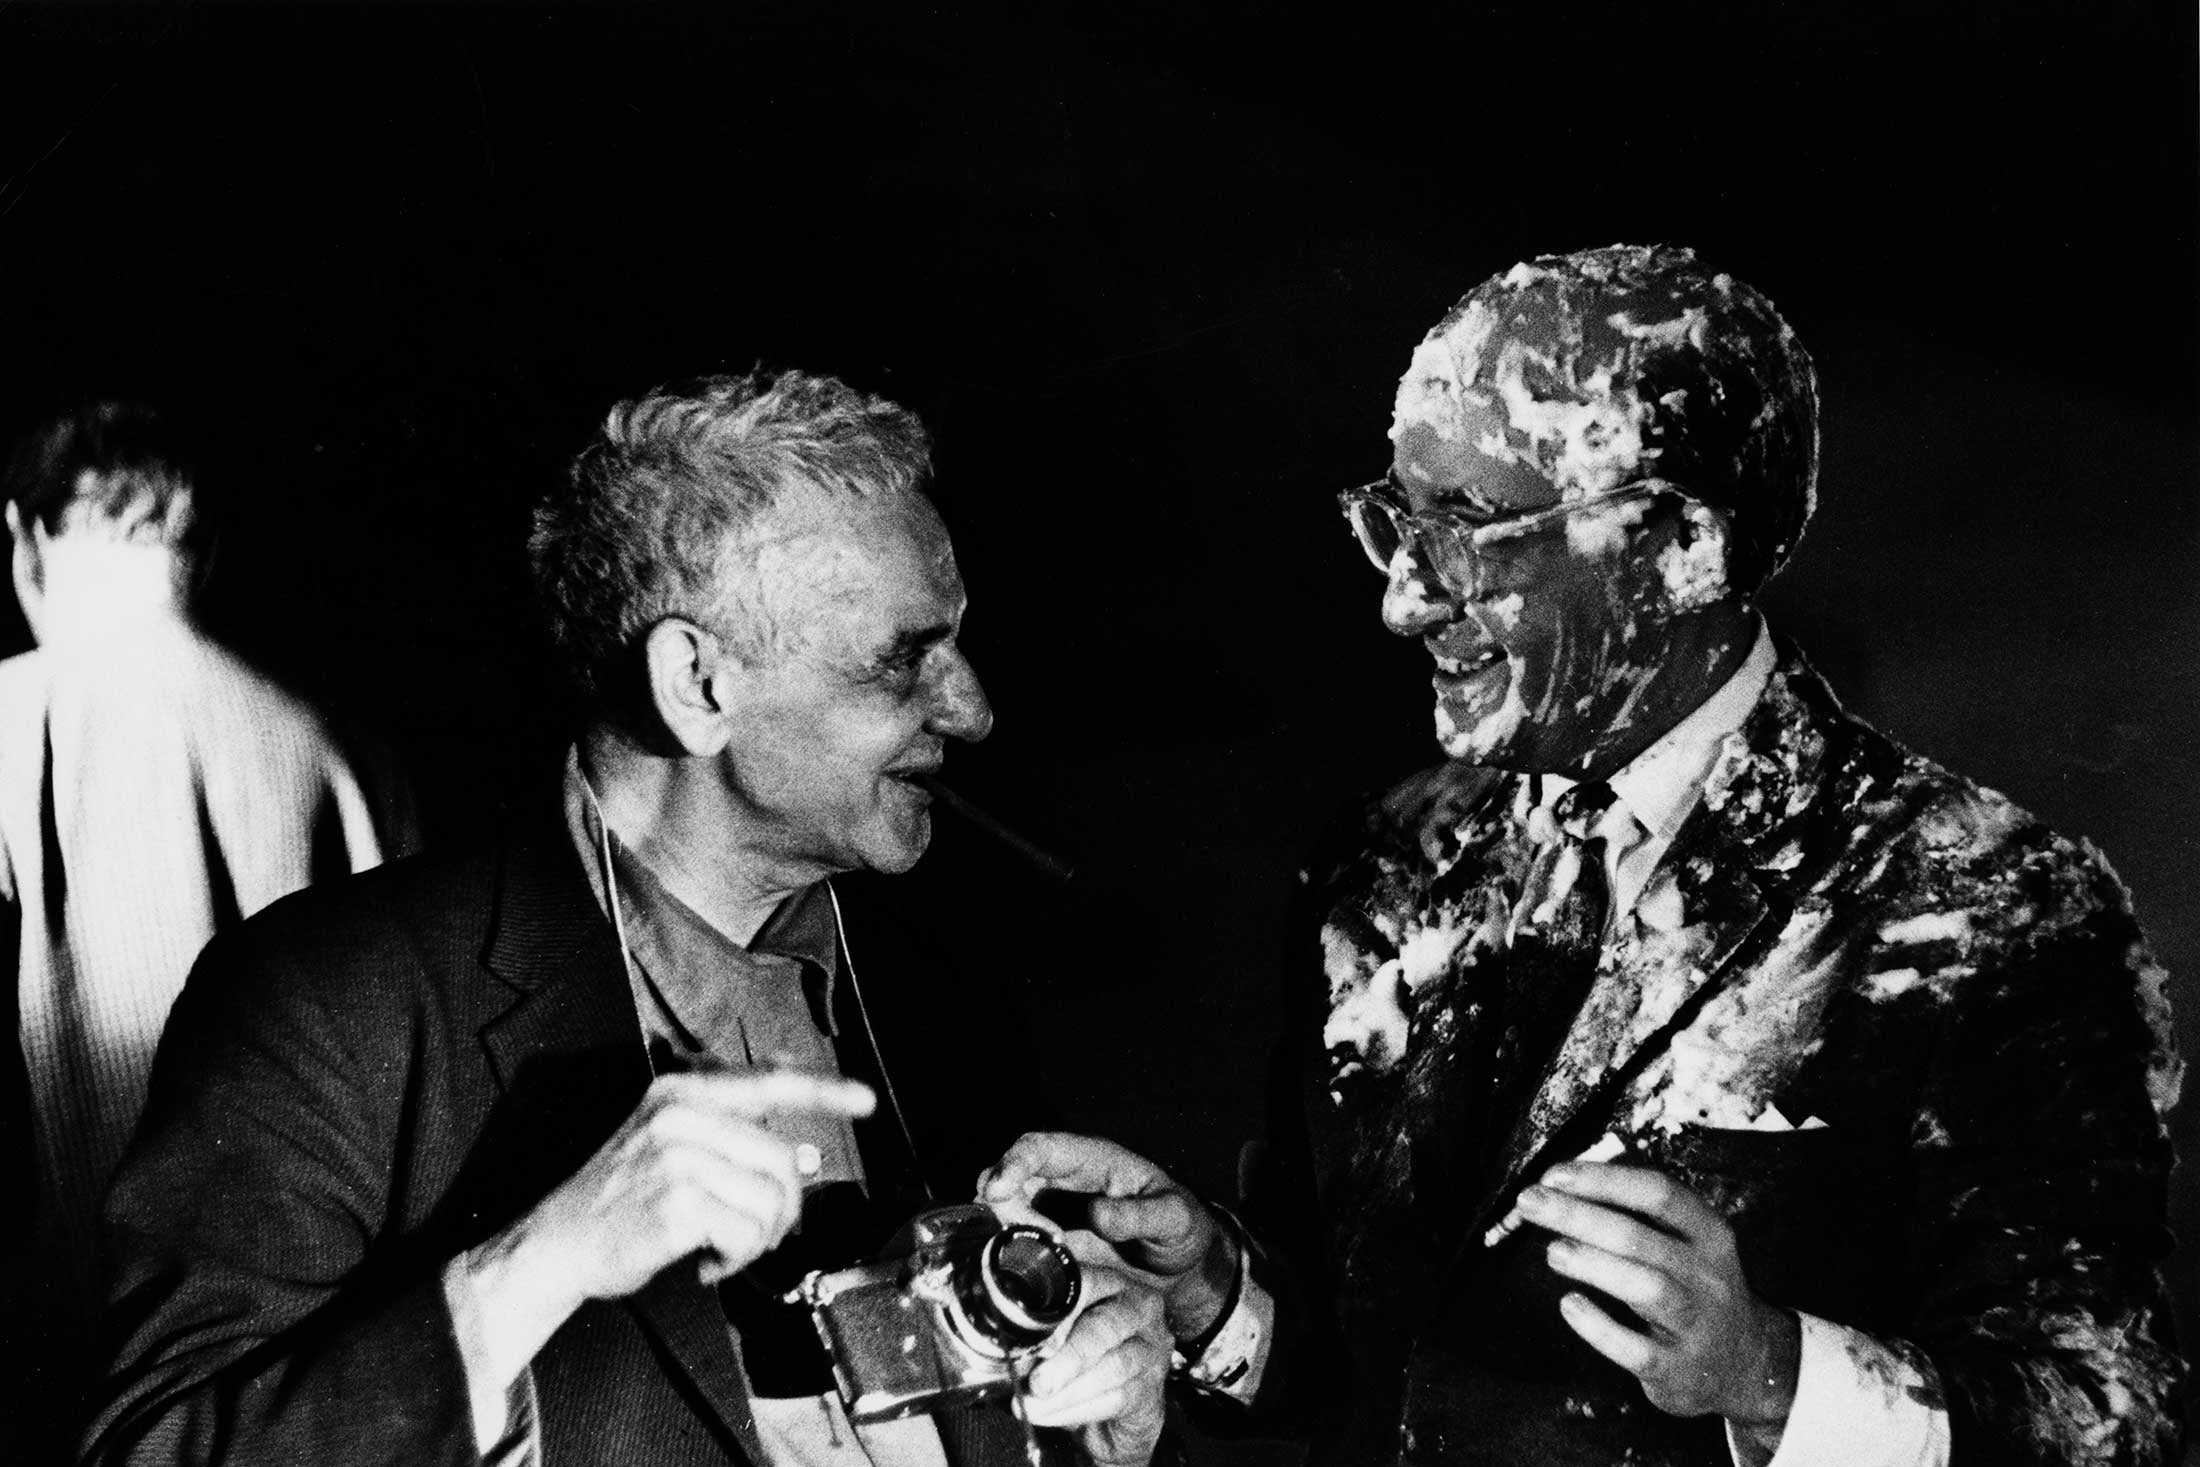 Weegee (left) and Peter Sellers, covered in custard and holding a cigarette, after the pie fight on the set of Dr. Strangelove.